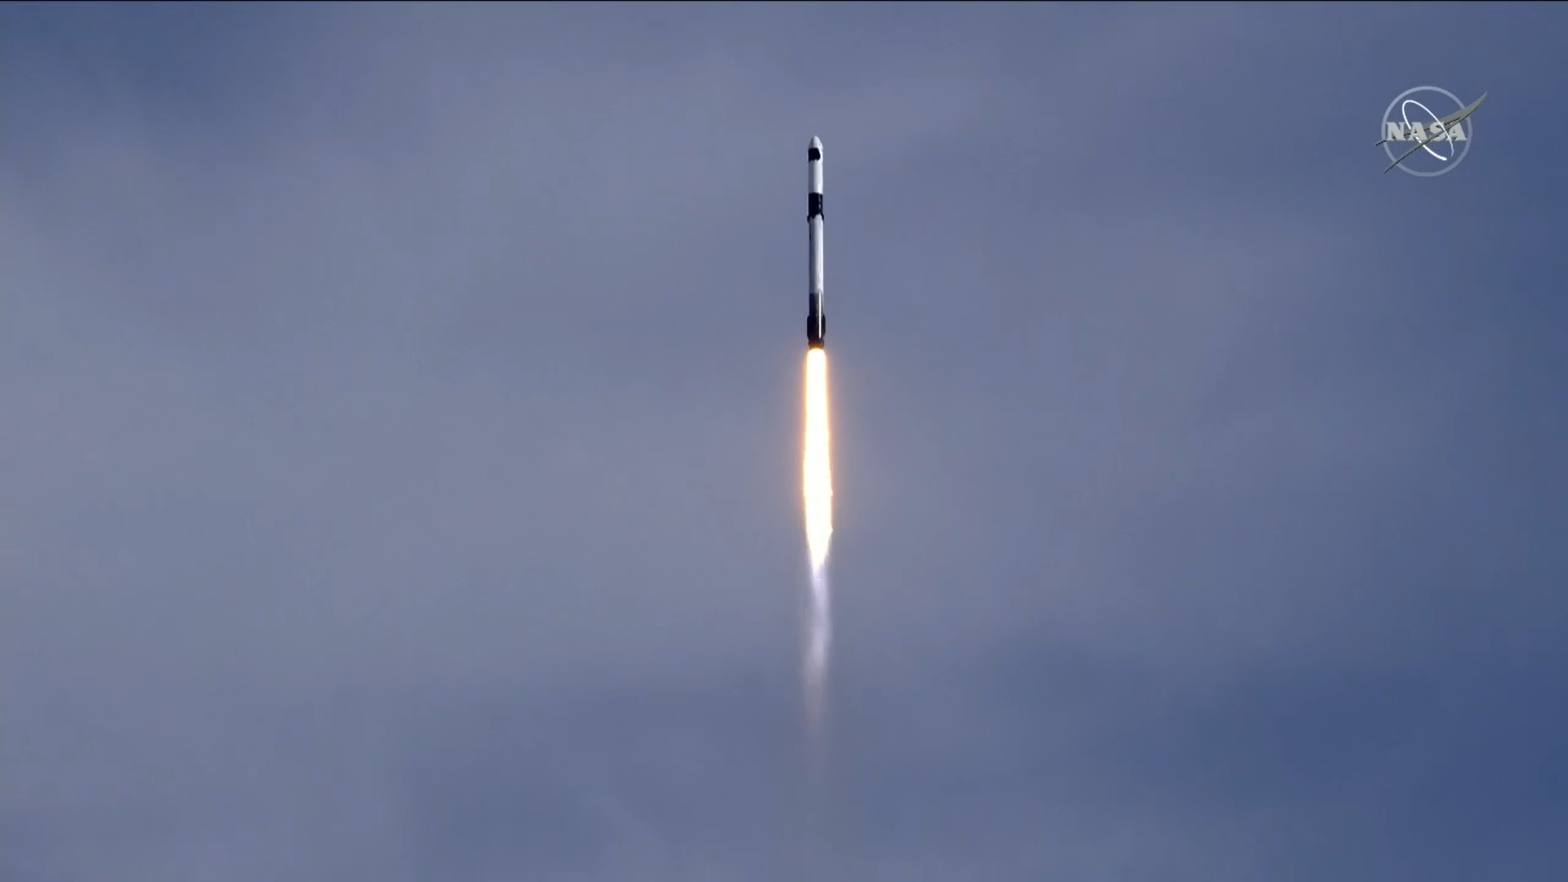 Launch of a SpaceX Falcon 9 rocket carrying a Dragon resupply spacecraft on December 6, 2020.  (Image: NASA Television)